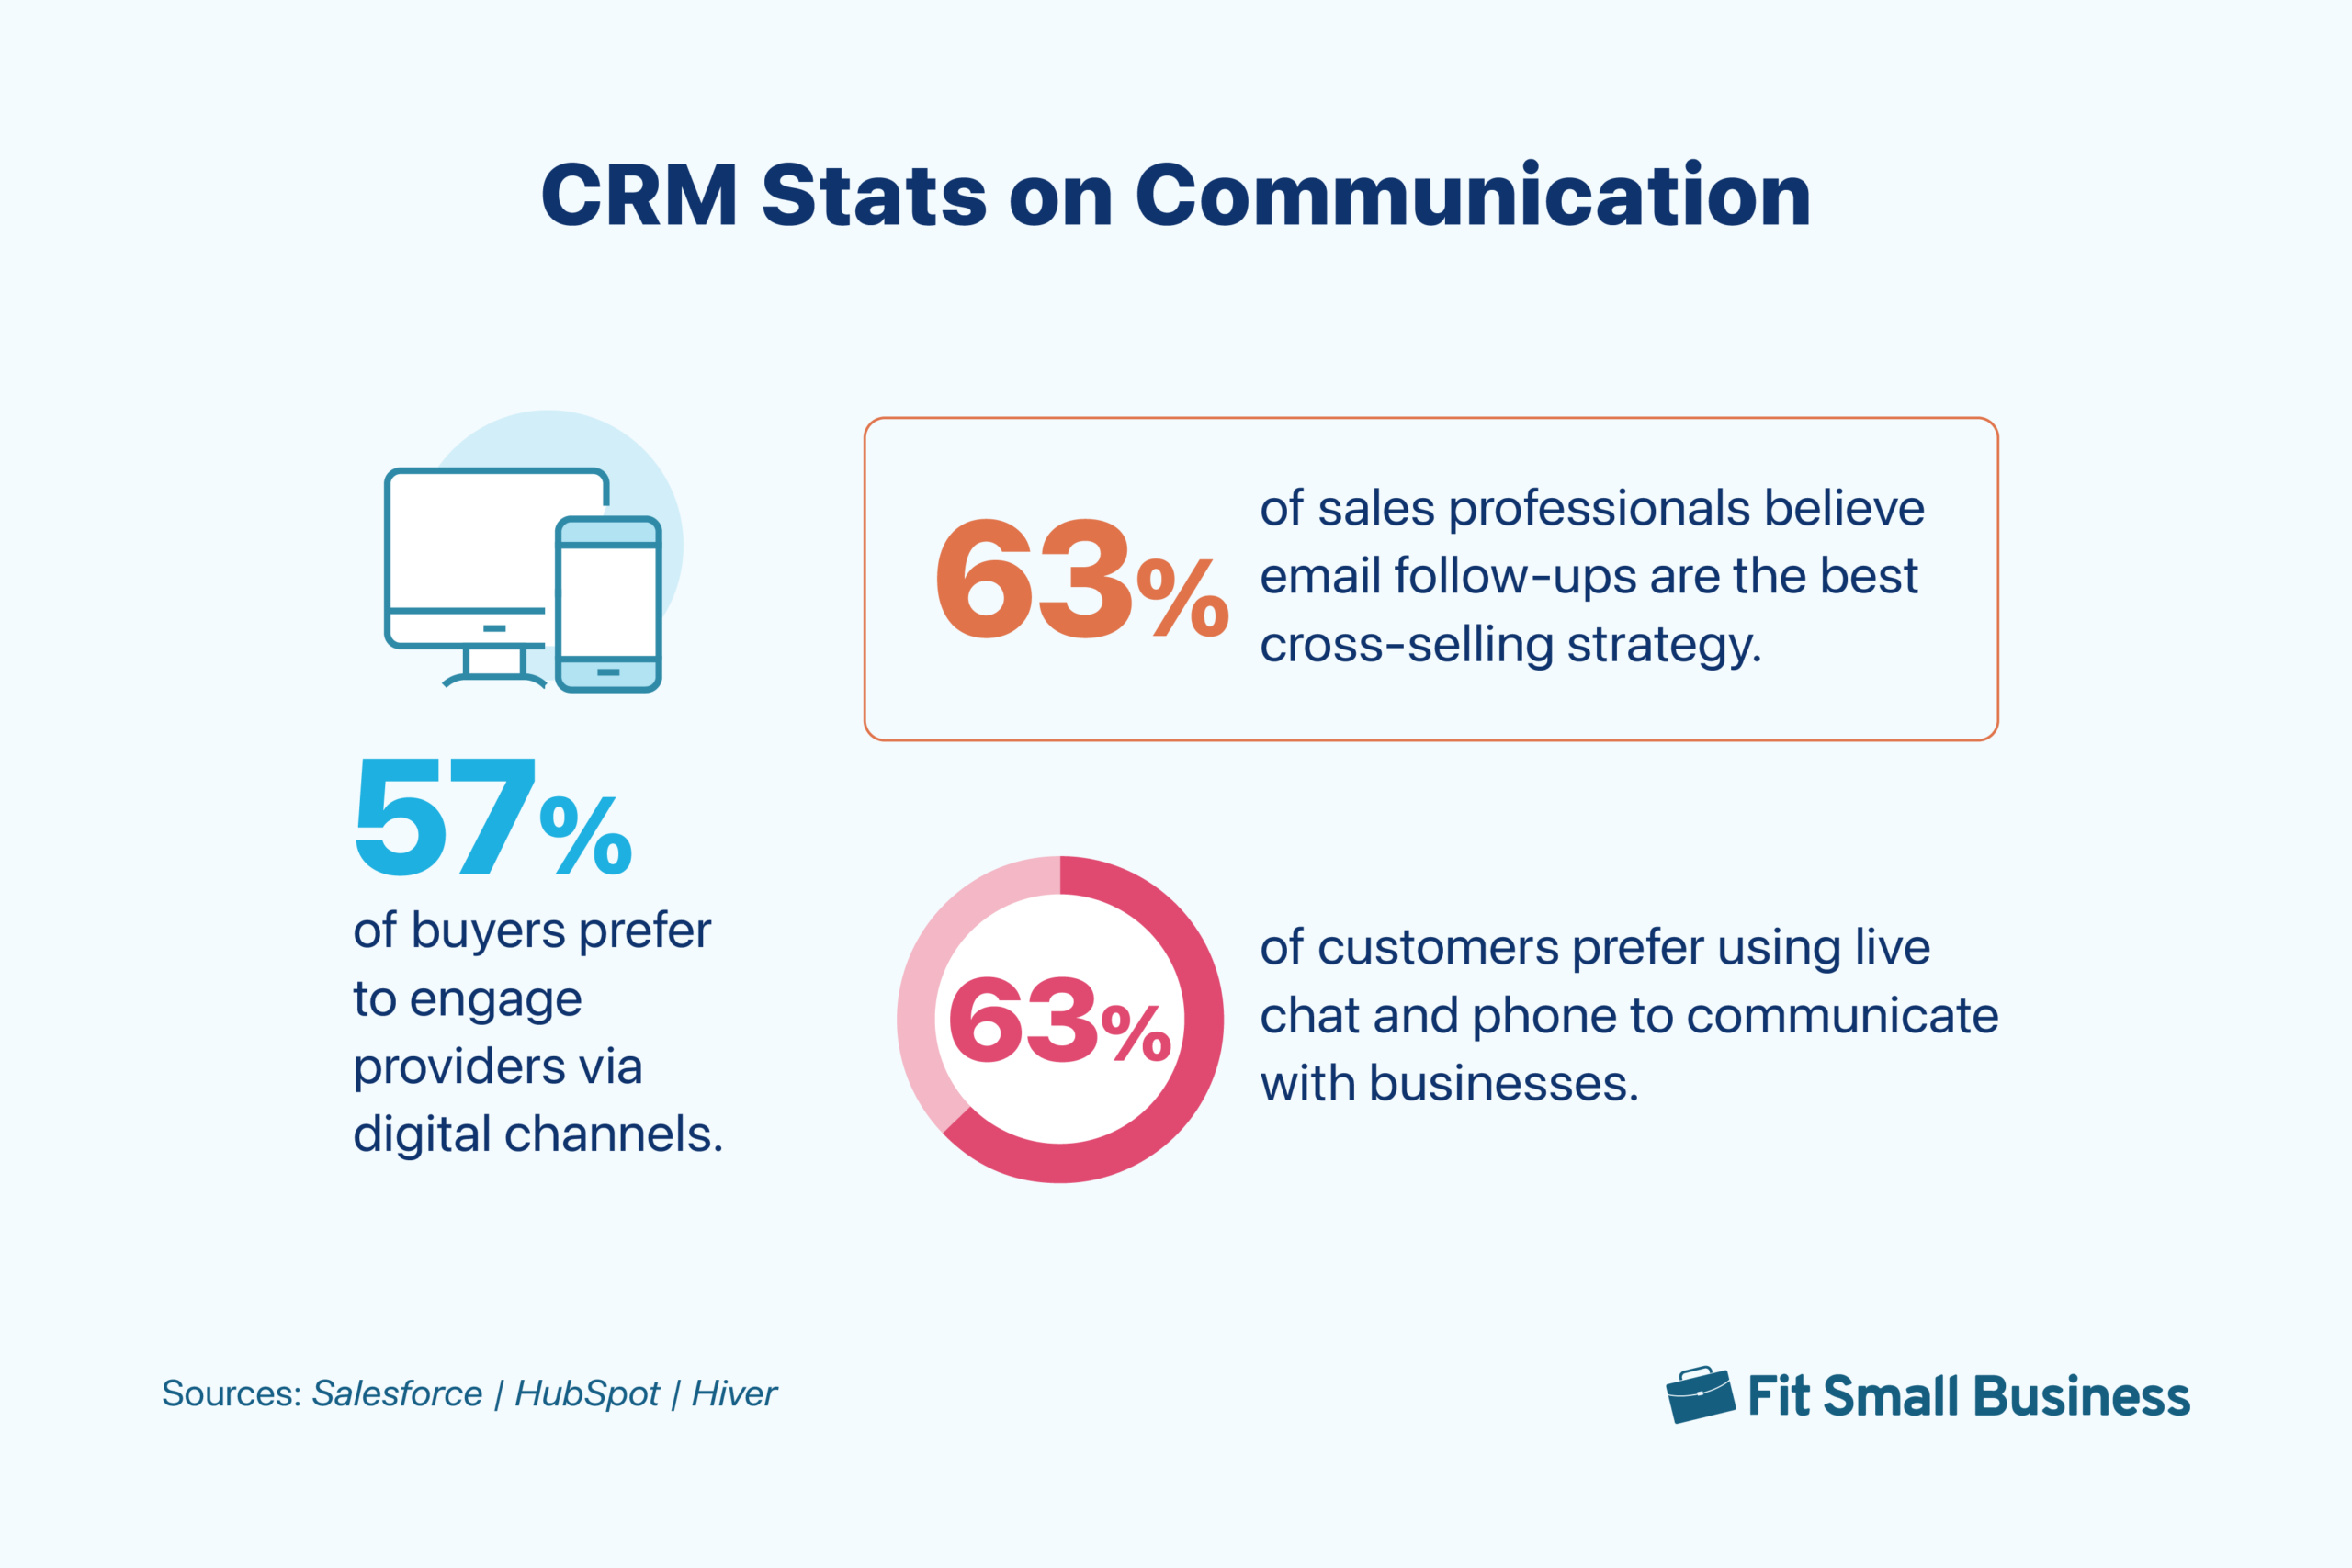 An infographic containing several CRM statistics on communication.